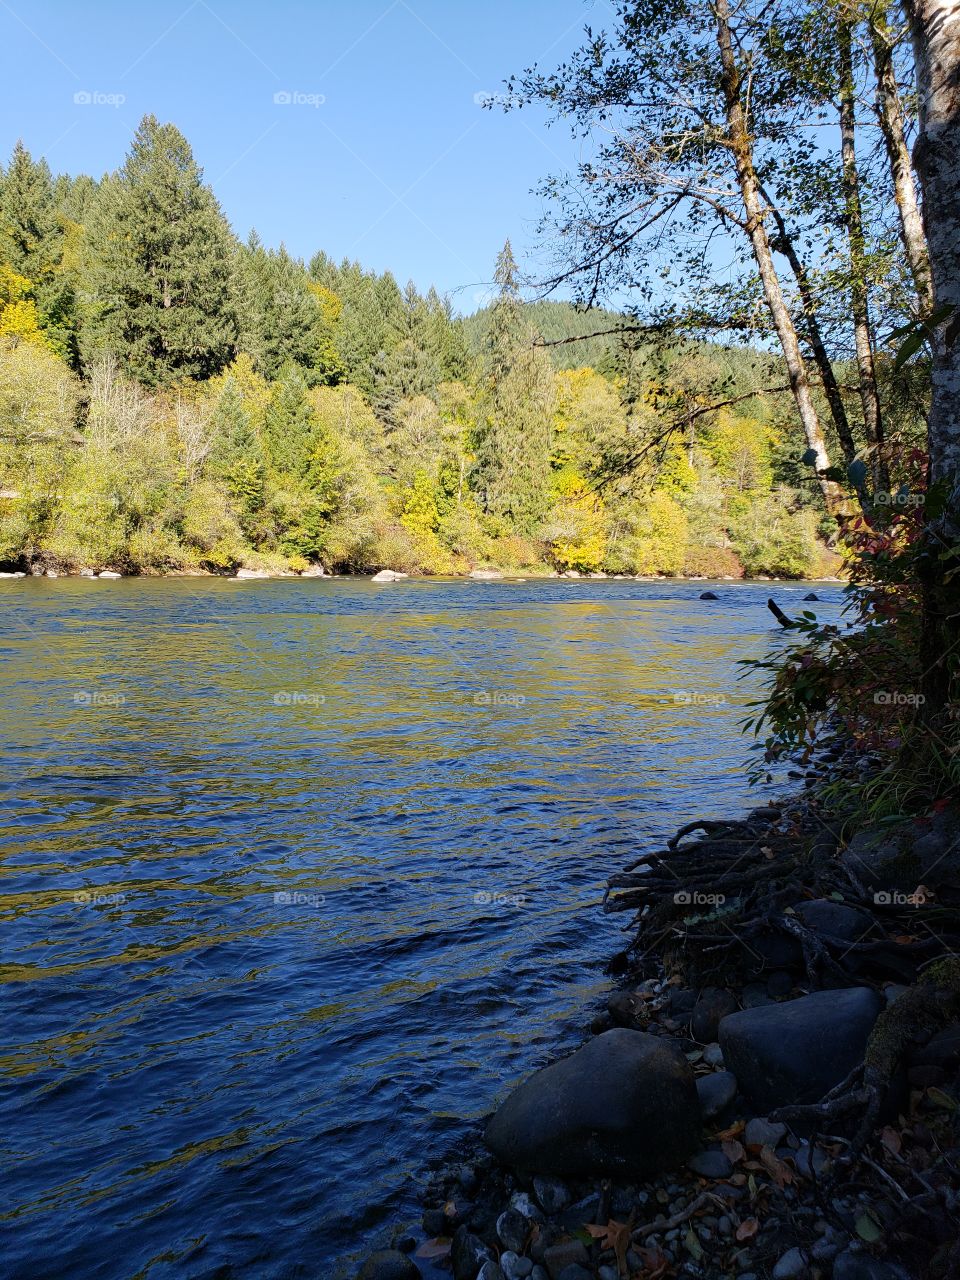 View across the beautiful McKenzie River in the forests of Oregon to trees and foliage in brilliant yellow and golden fall colors on the banks on the other side on a sunny fall day with clear skies. 